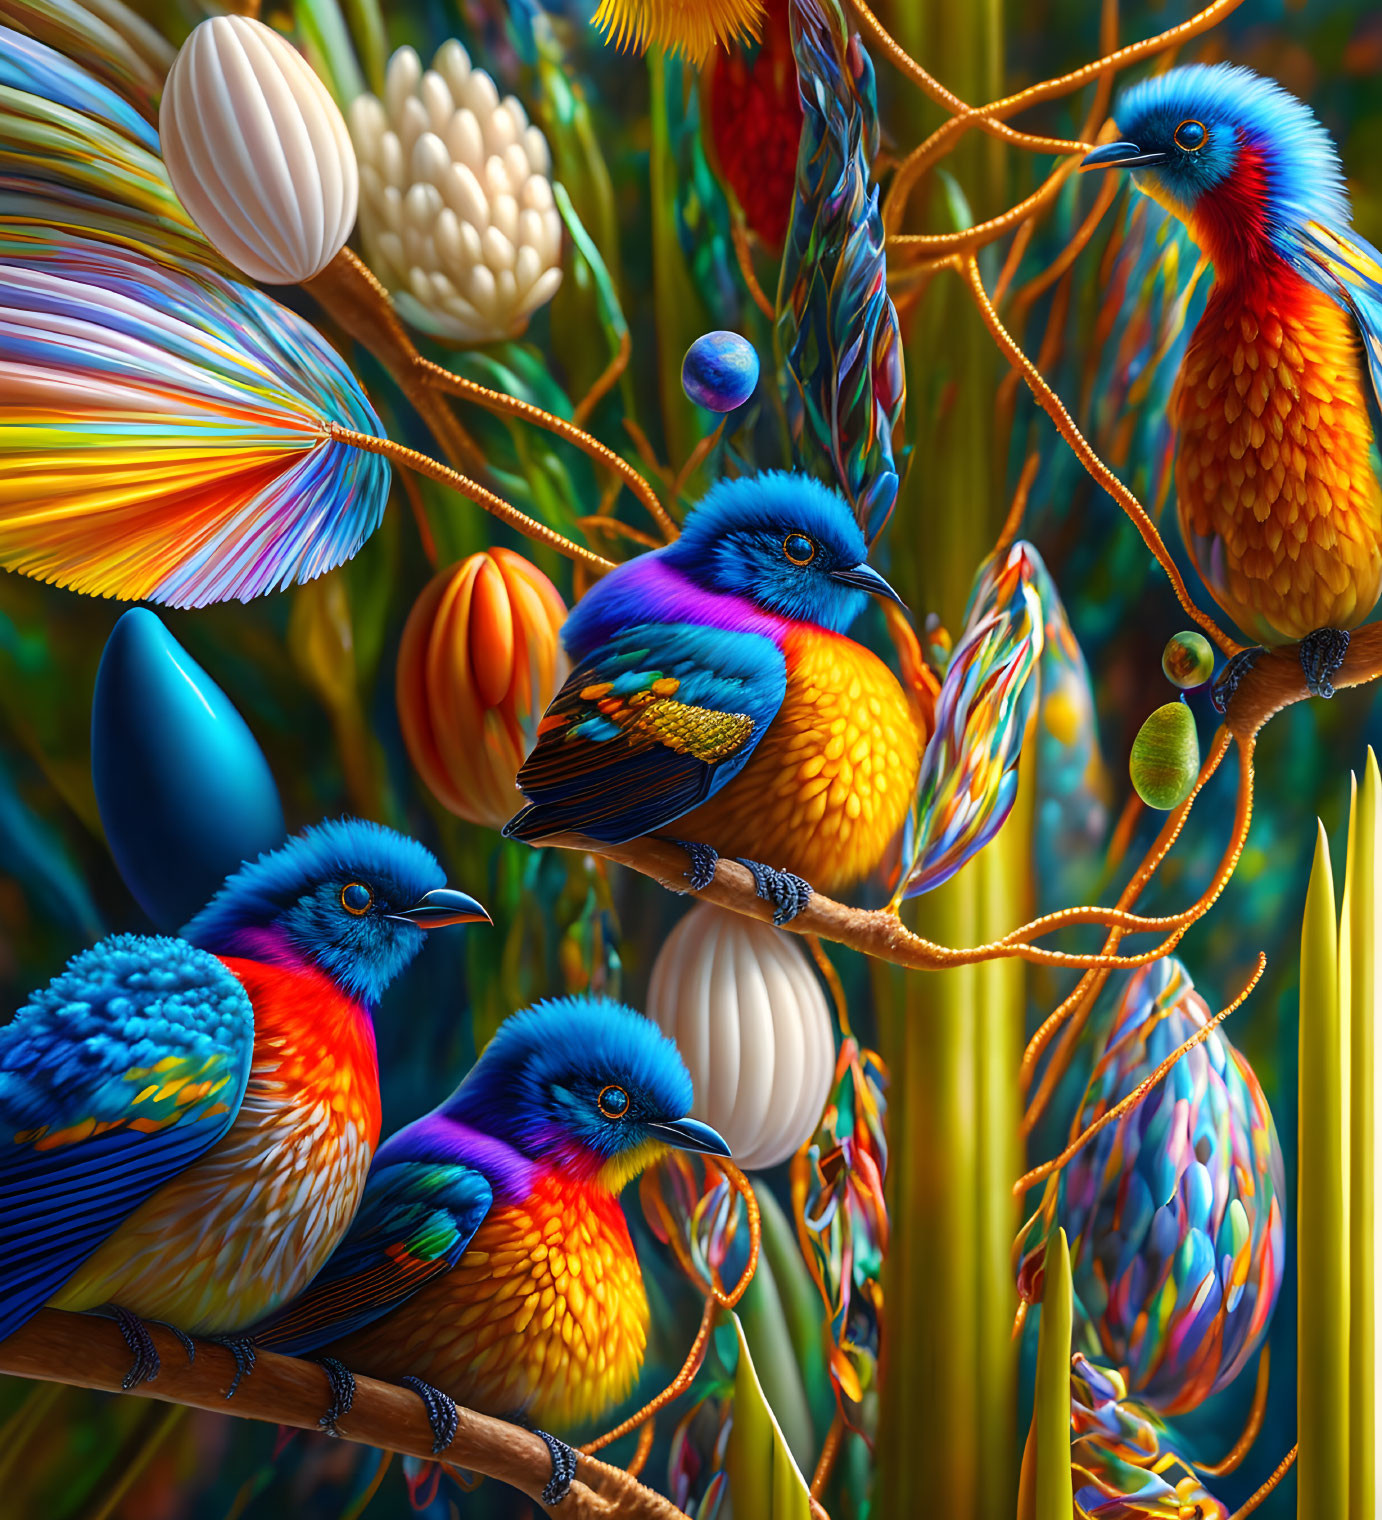 Colorful Birds Perched on Branches in Lush Flora and Vines